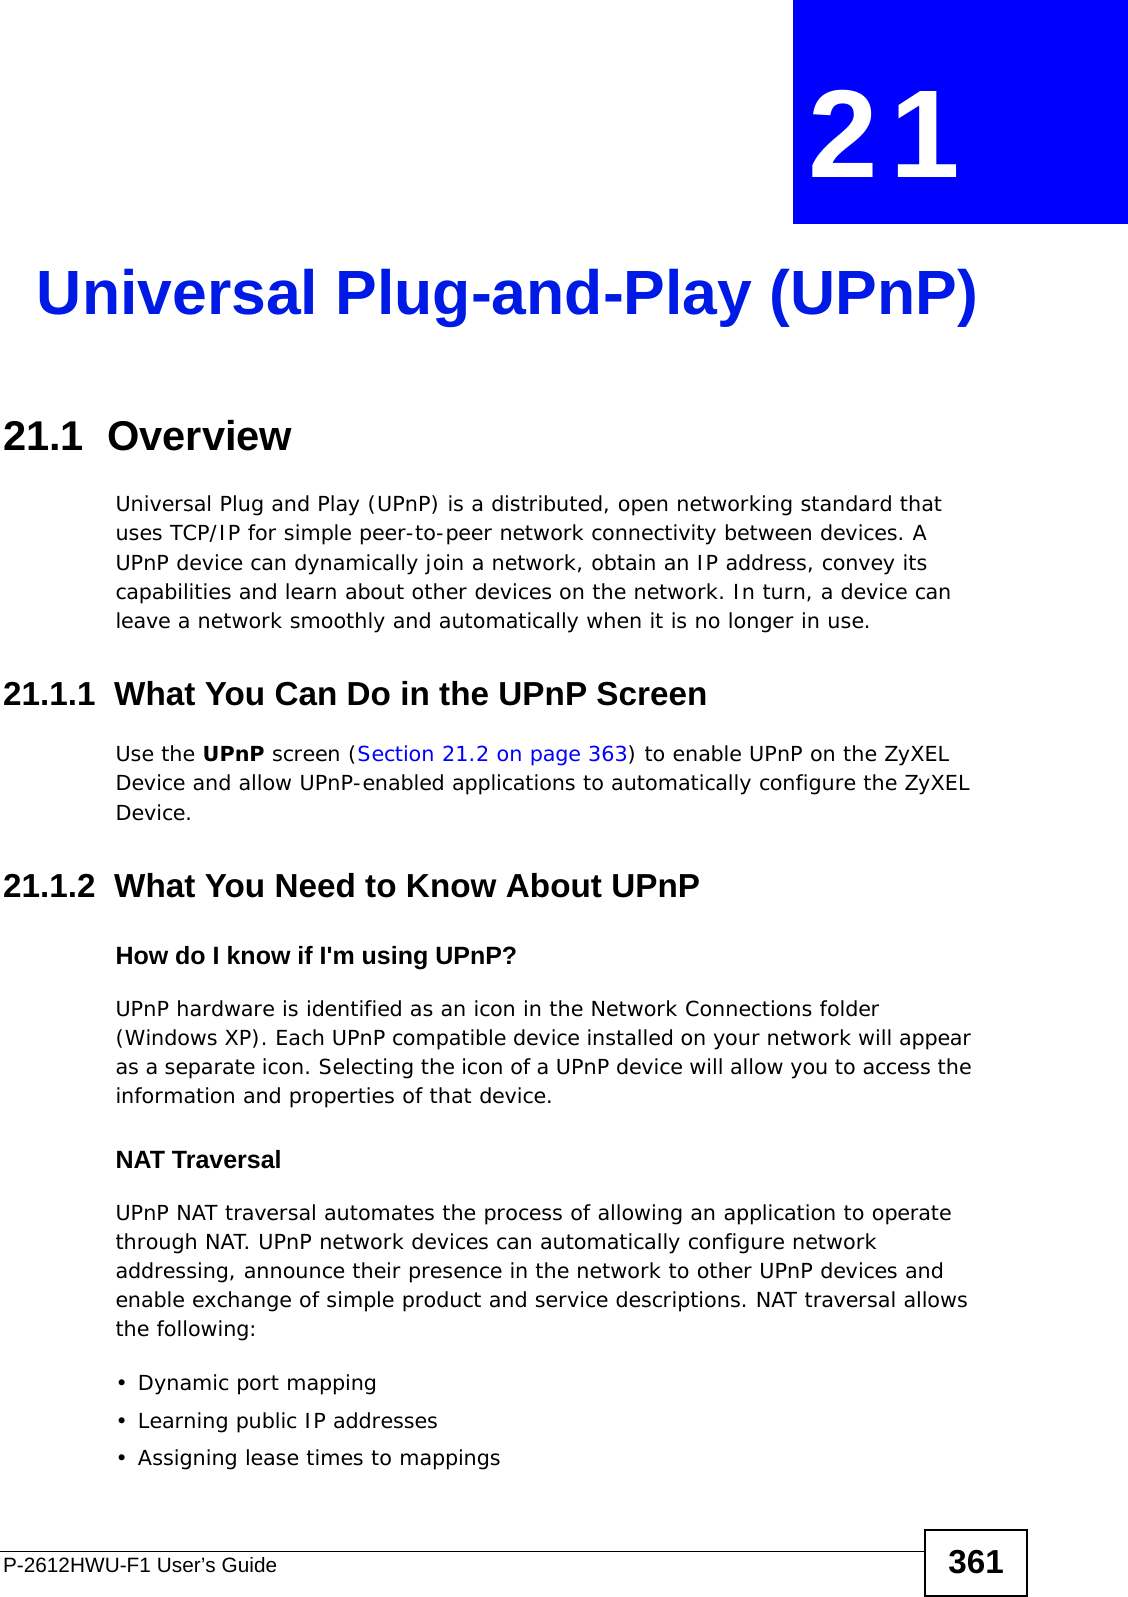 P-2612HWU-F1 User’s Guide 361CHAPTER  21 Universal Plug-and-Play (UPnP)21.1  Overview Universal Plug and Play (UPnP) is a distributed, open networking standard that uses TCP/IP for simple peer-to-peer network connectivity between devices. A UPnP device can dynamically join a network, obtain an IP address, convey its capabilities and learn about other devices on the network. In turn, a device can leave a network smoothly and automatically when it is no longer in use.21.1.1  What You Can Do in the UPnP ScreenUse the UPnP screen (Section 21.2 on page 363) to enable UPnP on the ZyXEL Device and allow UPnP-enabled applications to automatically configure the ZyXEL Device.21.1.2  What You Need to Know About UPnPHow do I know if I&apos;m using UPnP? UPnP hardware is identified as an icon in the Network Connections folder (Windows XP). Each UPnP compatible device installed on your network will appear as a separate icon. Selecting the icon of a UPnP device will allow you to access the information and properties of that device. NAT TraversalUPnP NAT traversal automates the process of allowing an application to operate through NAT. UPnP network devices can automatically configure network addressing, announce their presence in the network to other UPnP devices and enable exchange of simple product and service descriptions. NAT traversal allows the following:• Dynamic port mapping• Learning public IP addresses• Assigning lease times to mappings